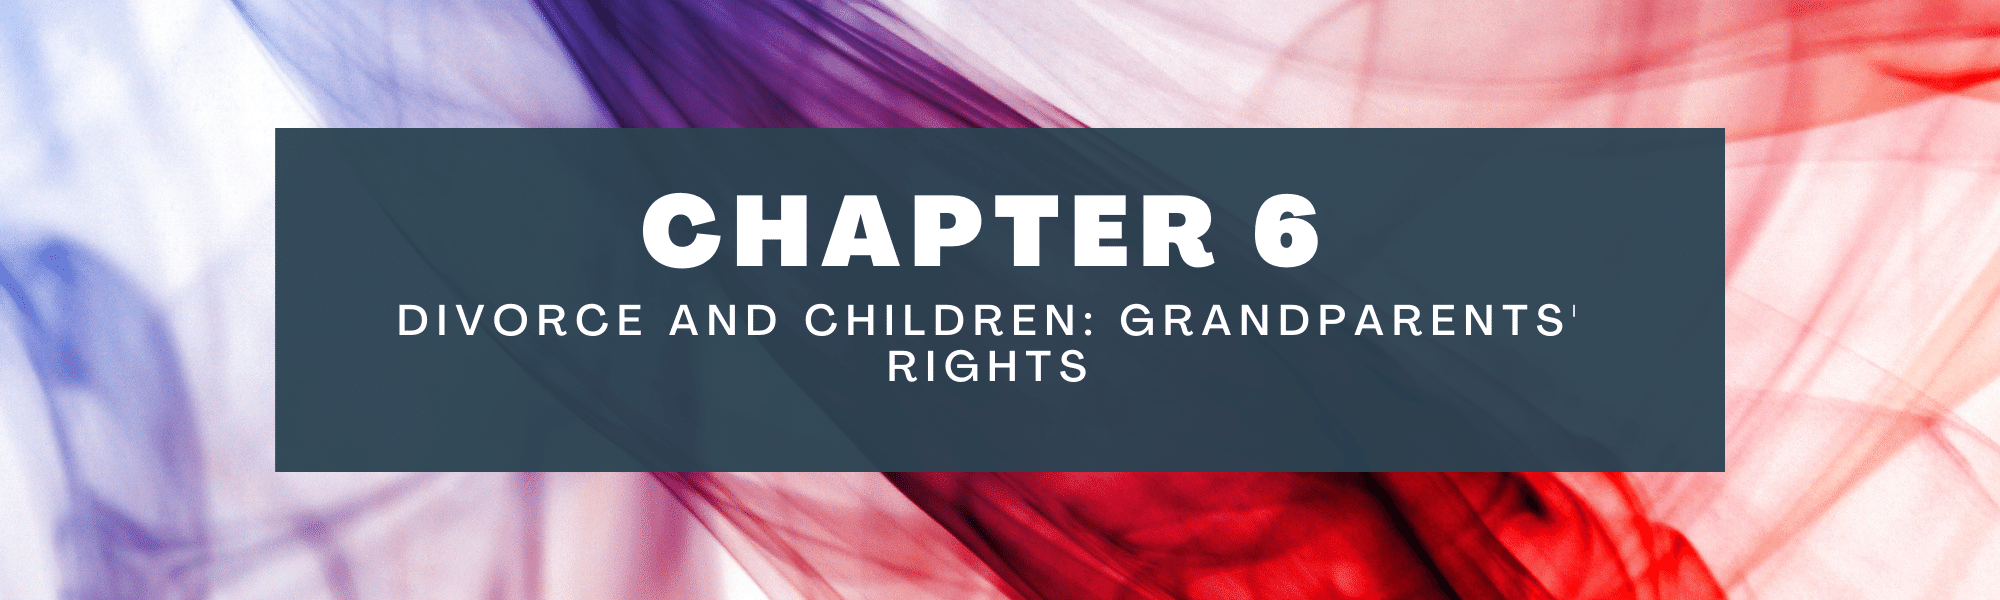 grandparents' rights banner